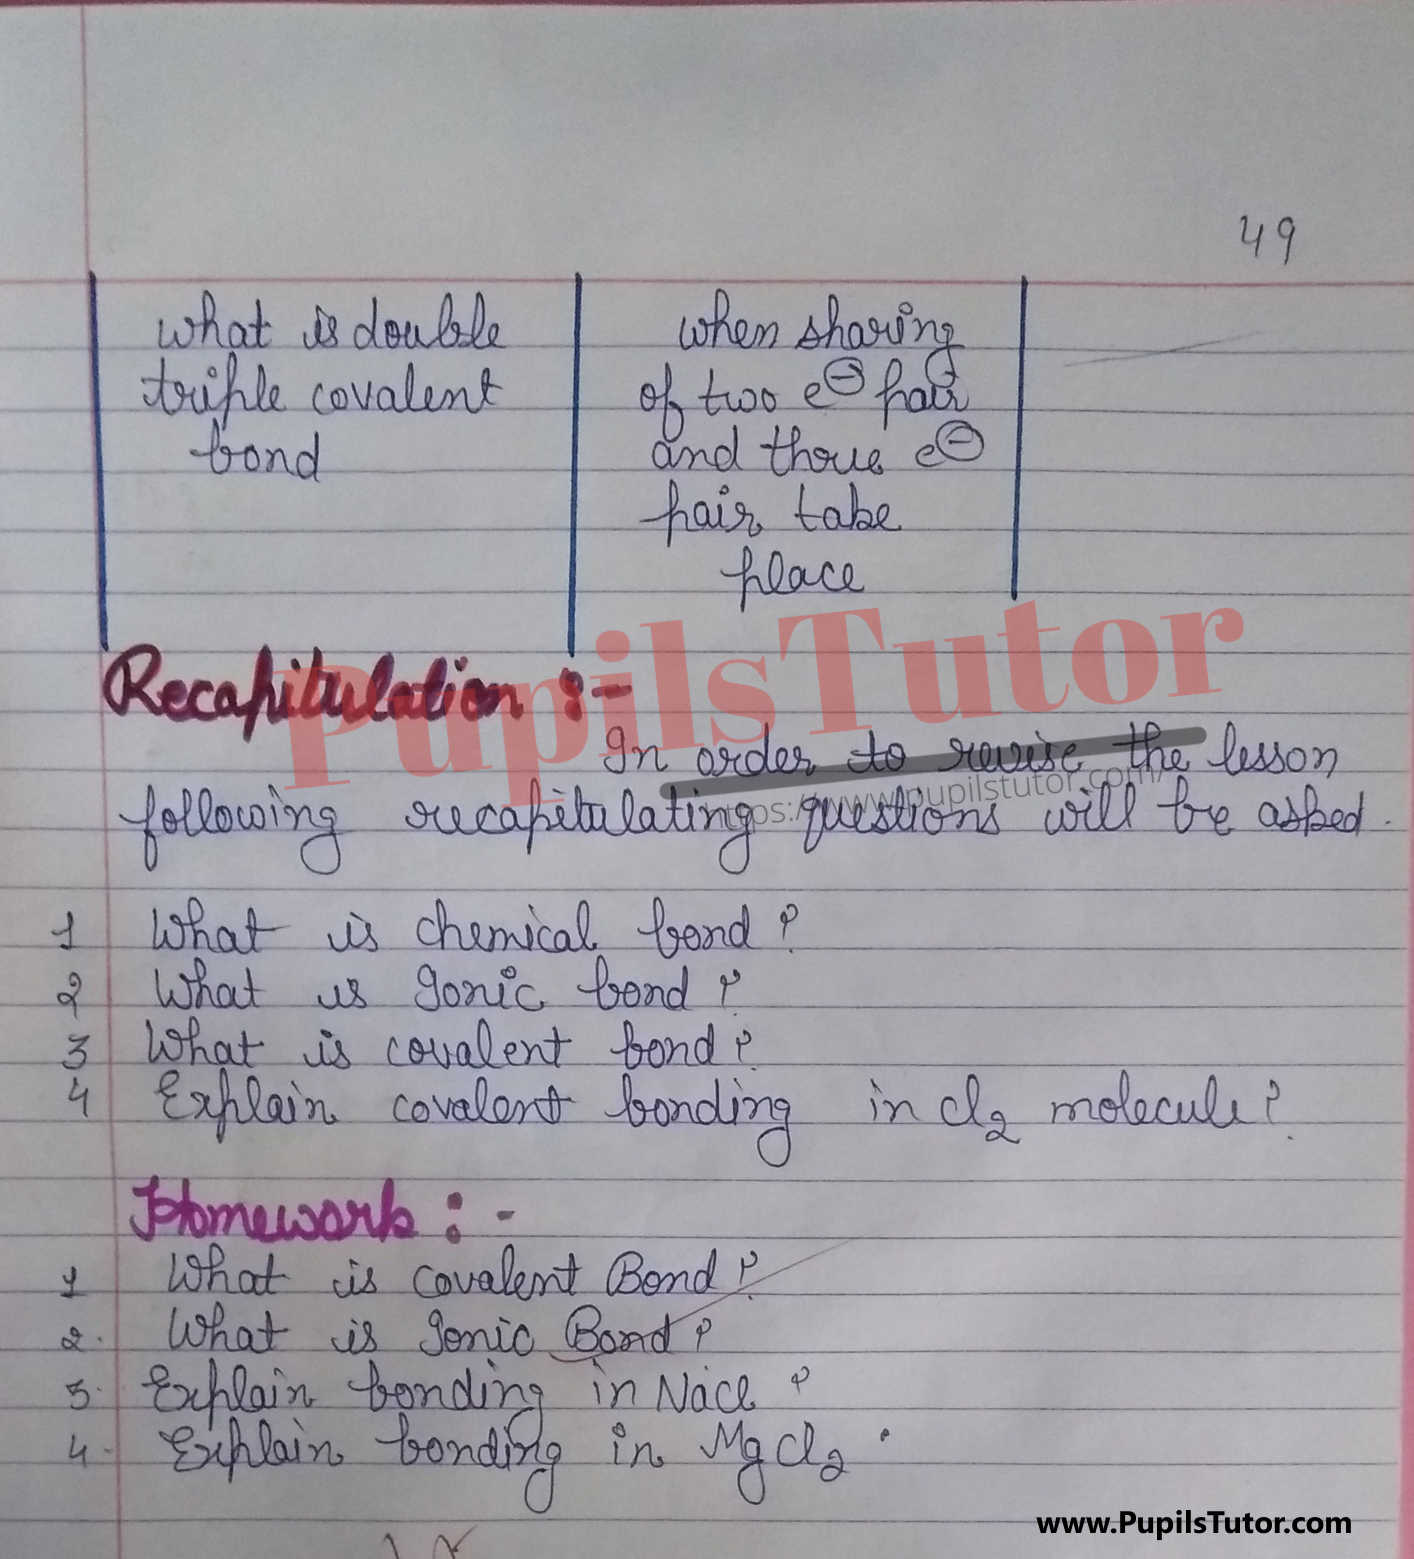 BED, DELED, BELED, BA B.Ed Integrated, B.Com B.Ed, BSC BEd, BTC, BSTC, M.ED, DED And NIOS Teaching Of Chemistry Class 4th 5th 6th 7th 8th 9th, 10th, 11th, 12th Digital Lesson Plan Format On Covalent Bonding And Chemical Bonding Topic – [Page And Pic Number 5] – https://www.pupilstutor.com/